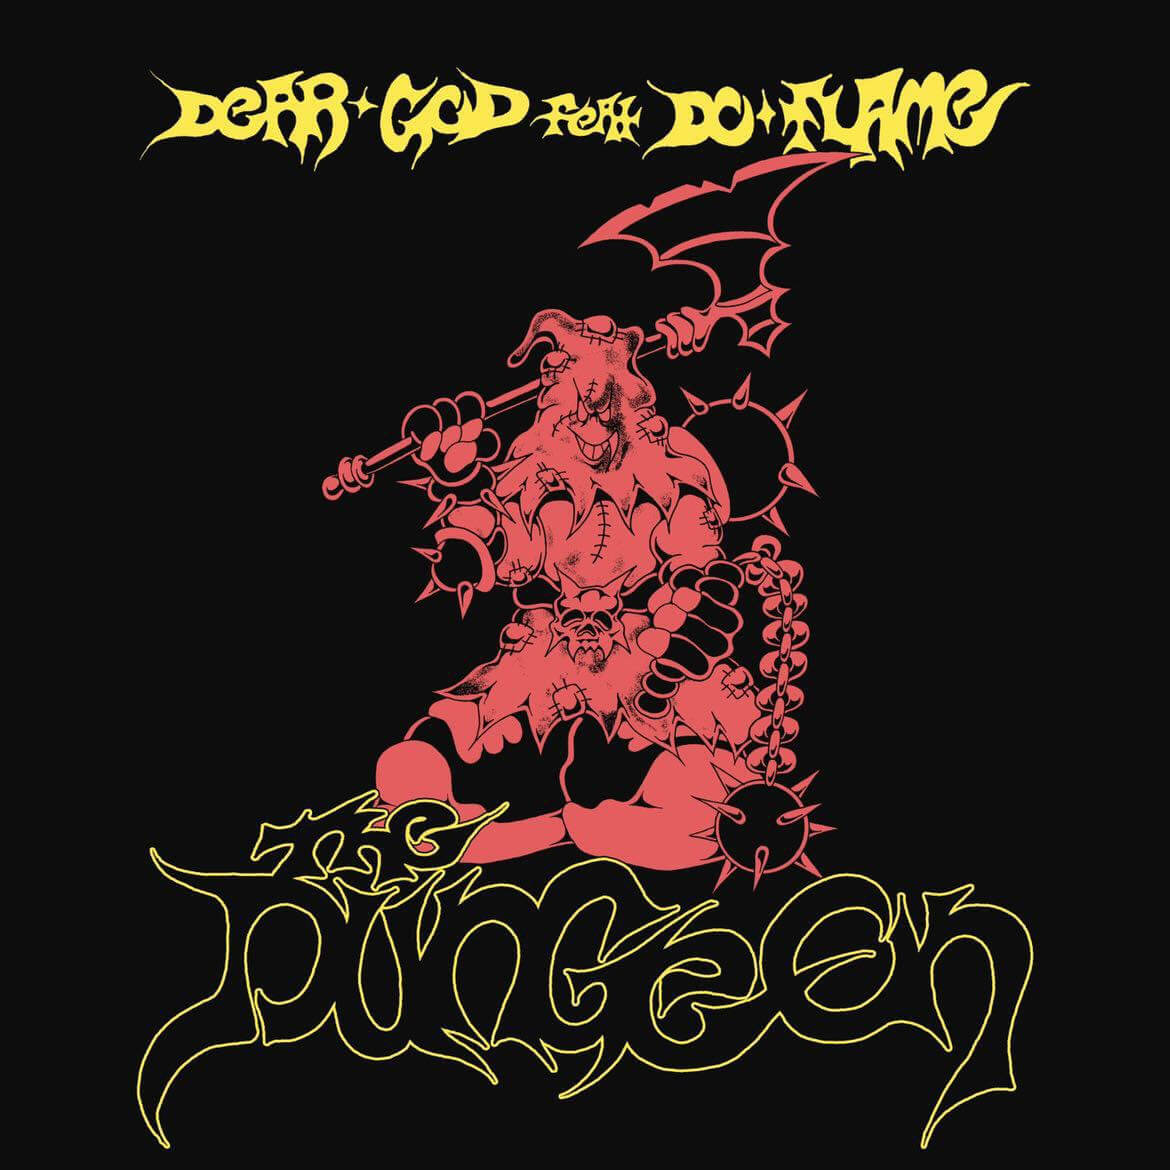 Dear-God teams up with DoFlame for a new single "The Dungeon" out now via Dine Alone Worldwide. Produced by Robert Ortiz and Lecx Stacey